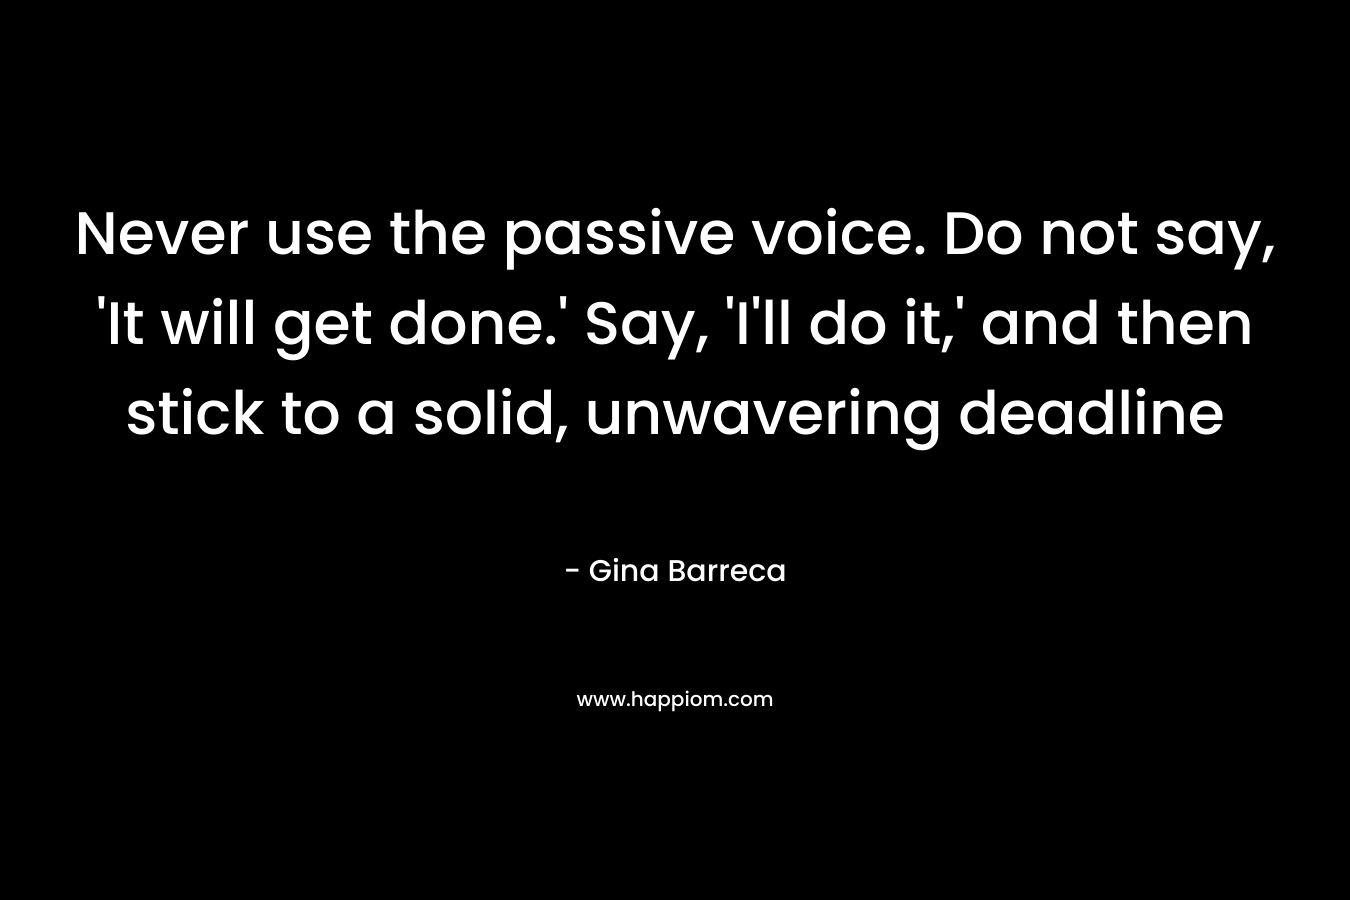 Never use the passive voice. Do not say, ‘It will get done.’ Say, ‘I’ll do it,’ and then stick to a solid, unwavering deadline – Gina Barreca